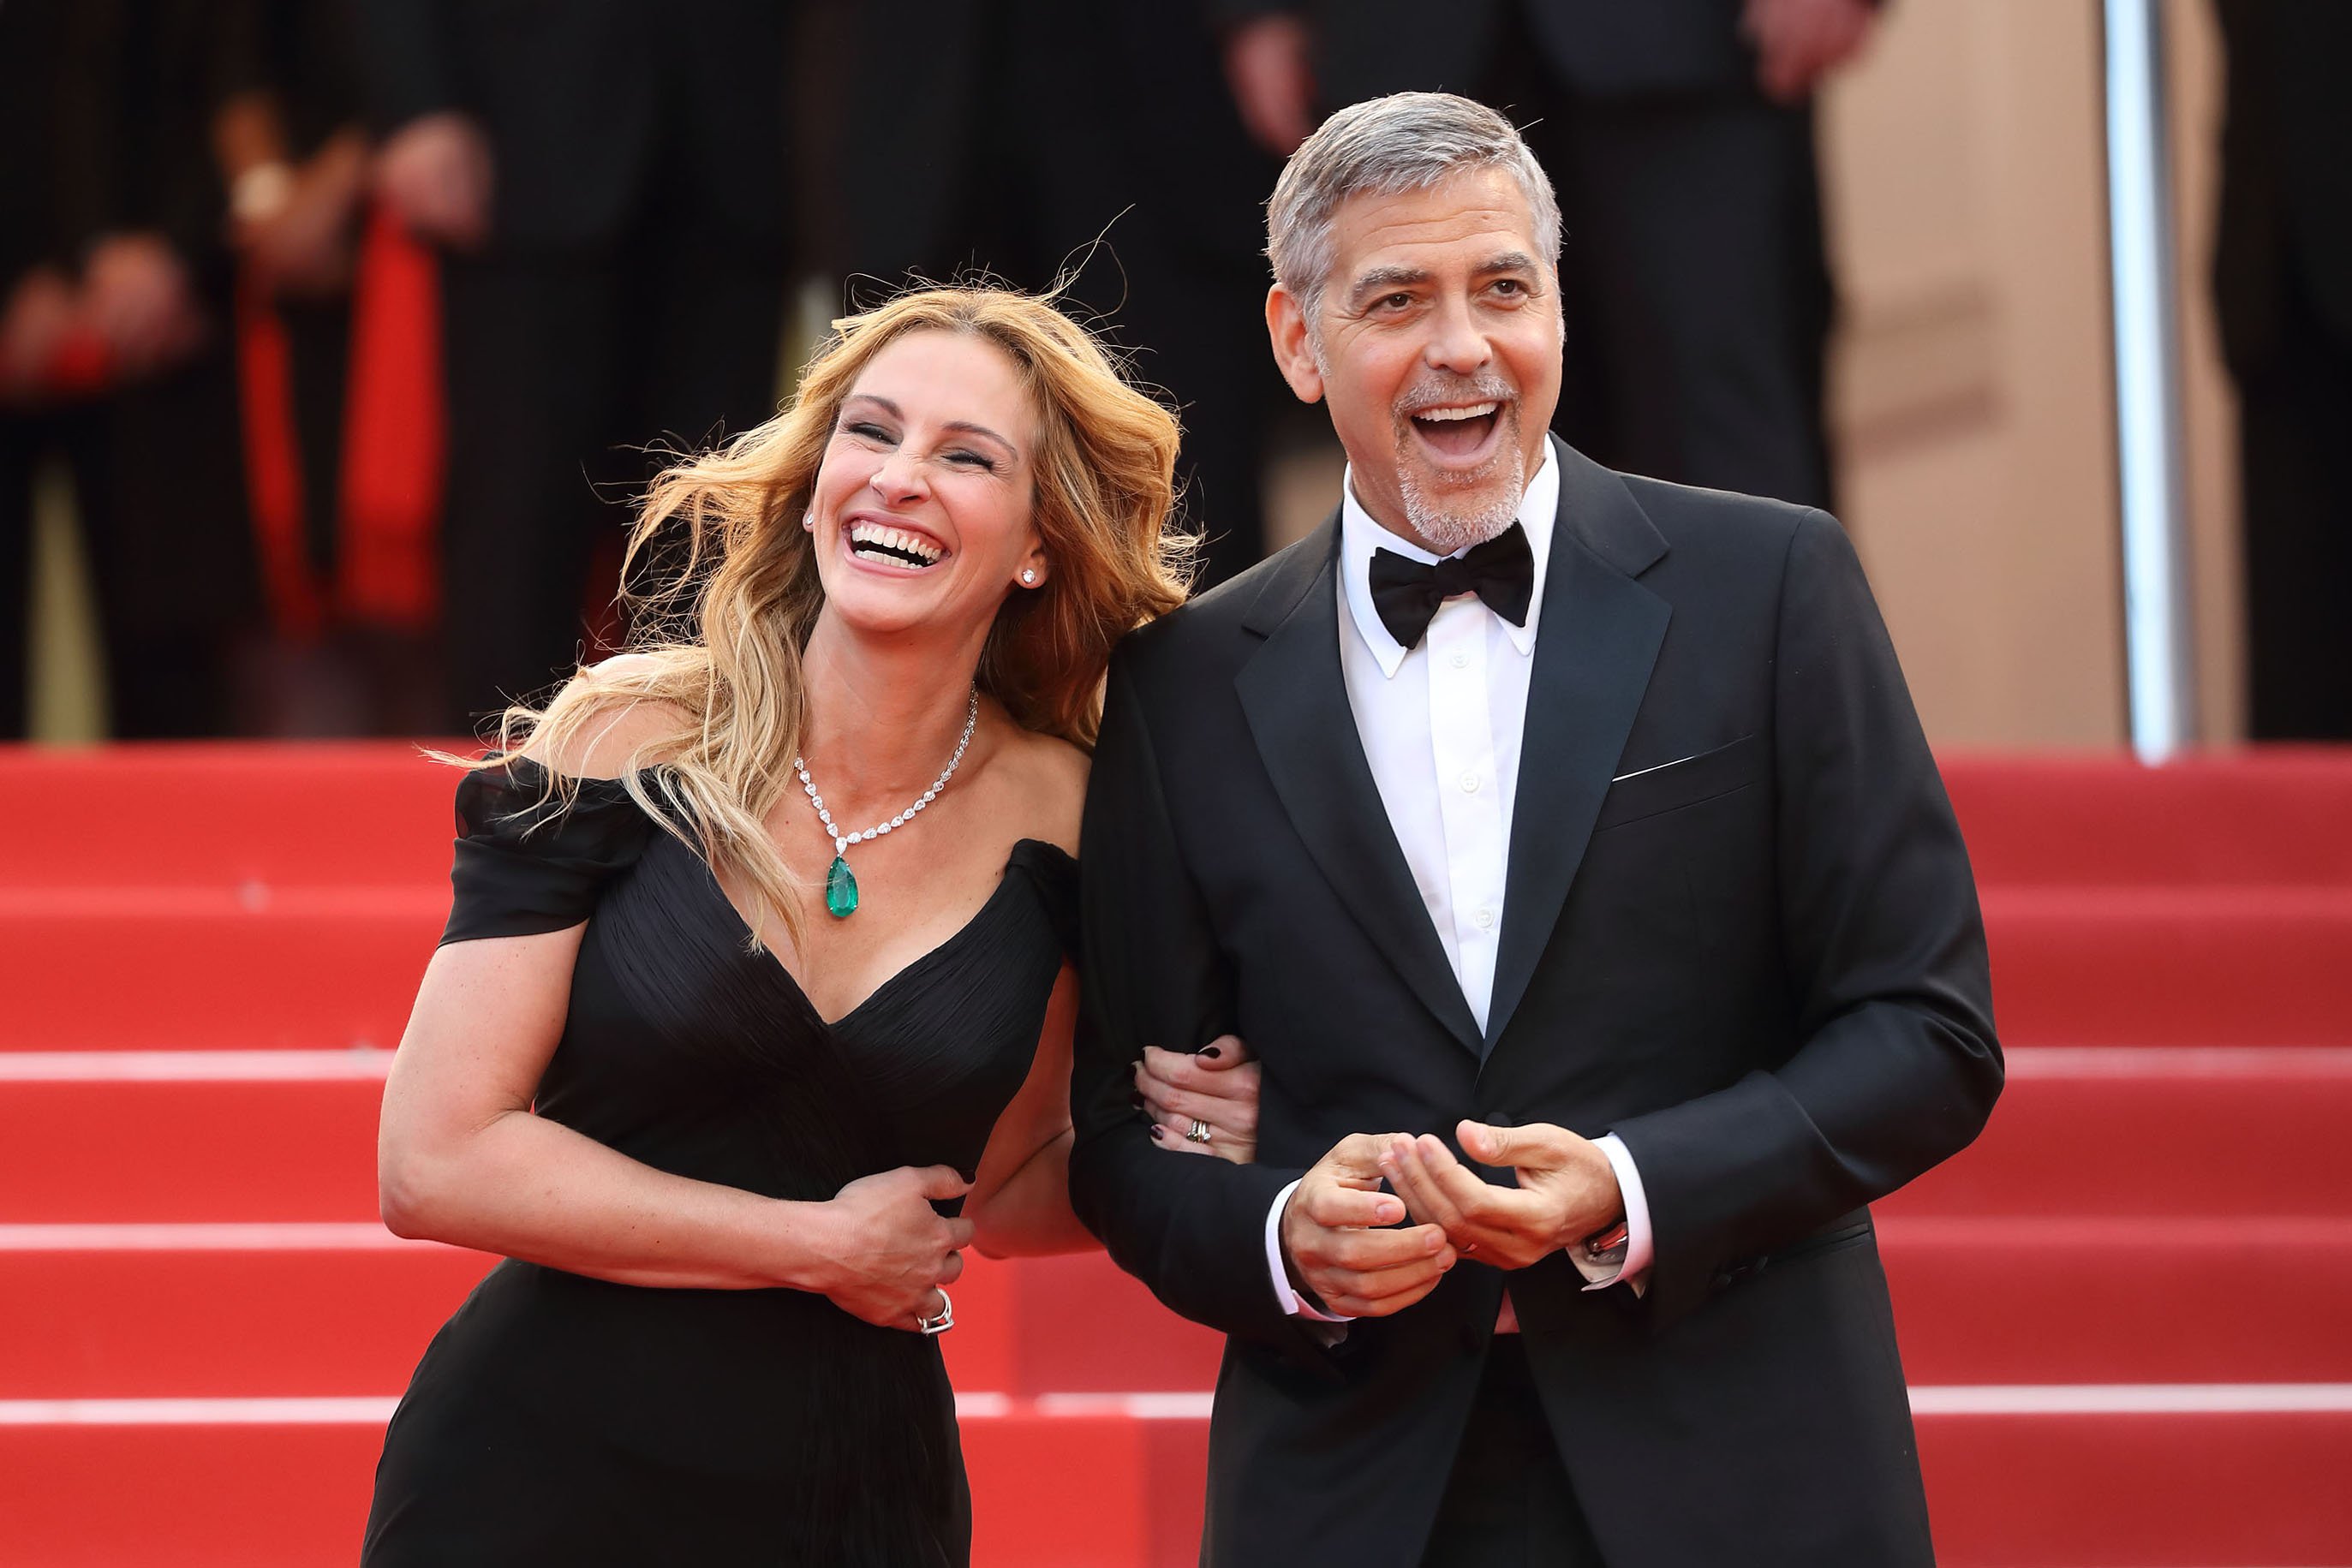 Julia Roberts and George Clooney attend the 'Money Monster' premiere during the 69th annual Cannes Film Festival at the Palais des Festivals on May 12, 2016 in Cannes, France. | Source: Getty Images